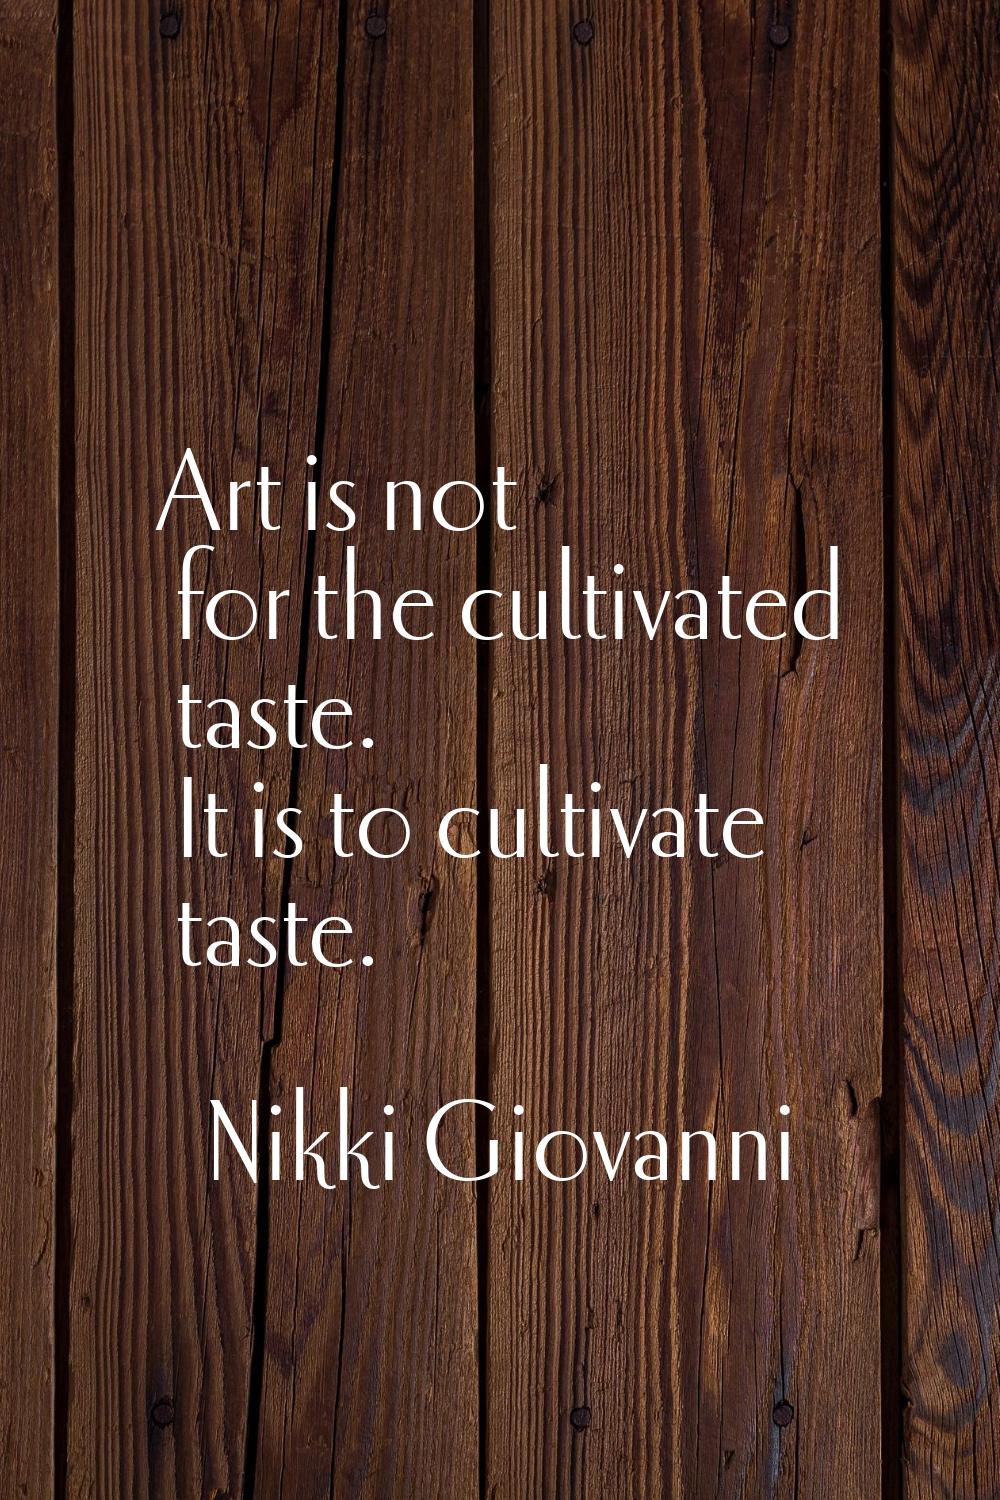 Art is not for the cultivated taste. It is to cultivate taste.